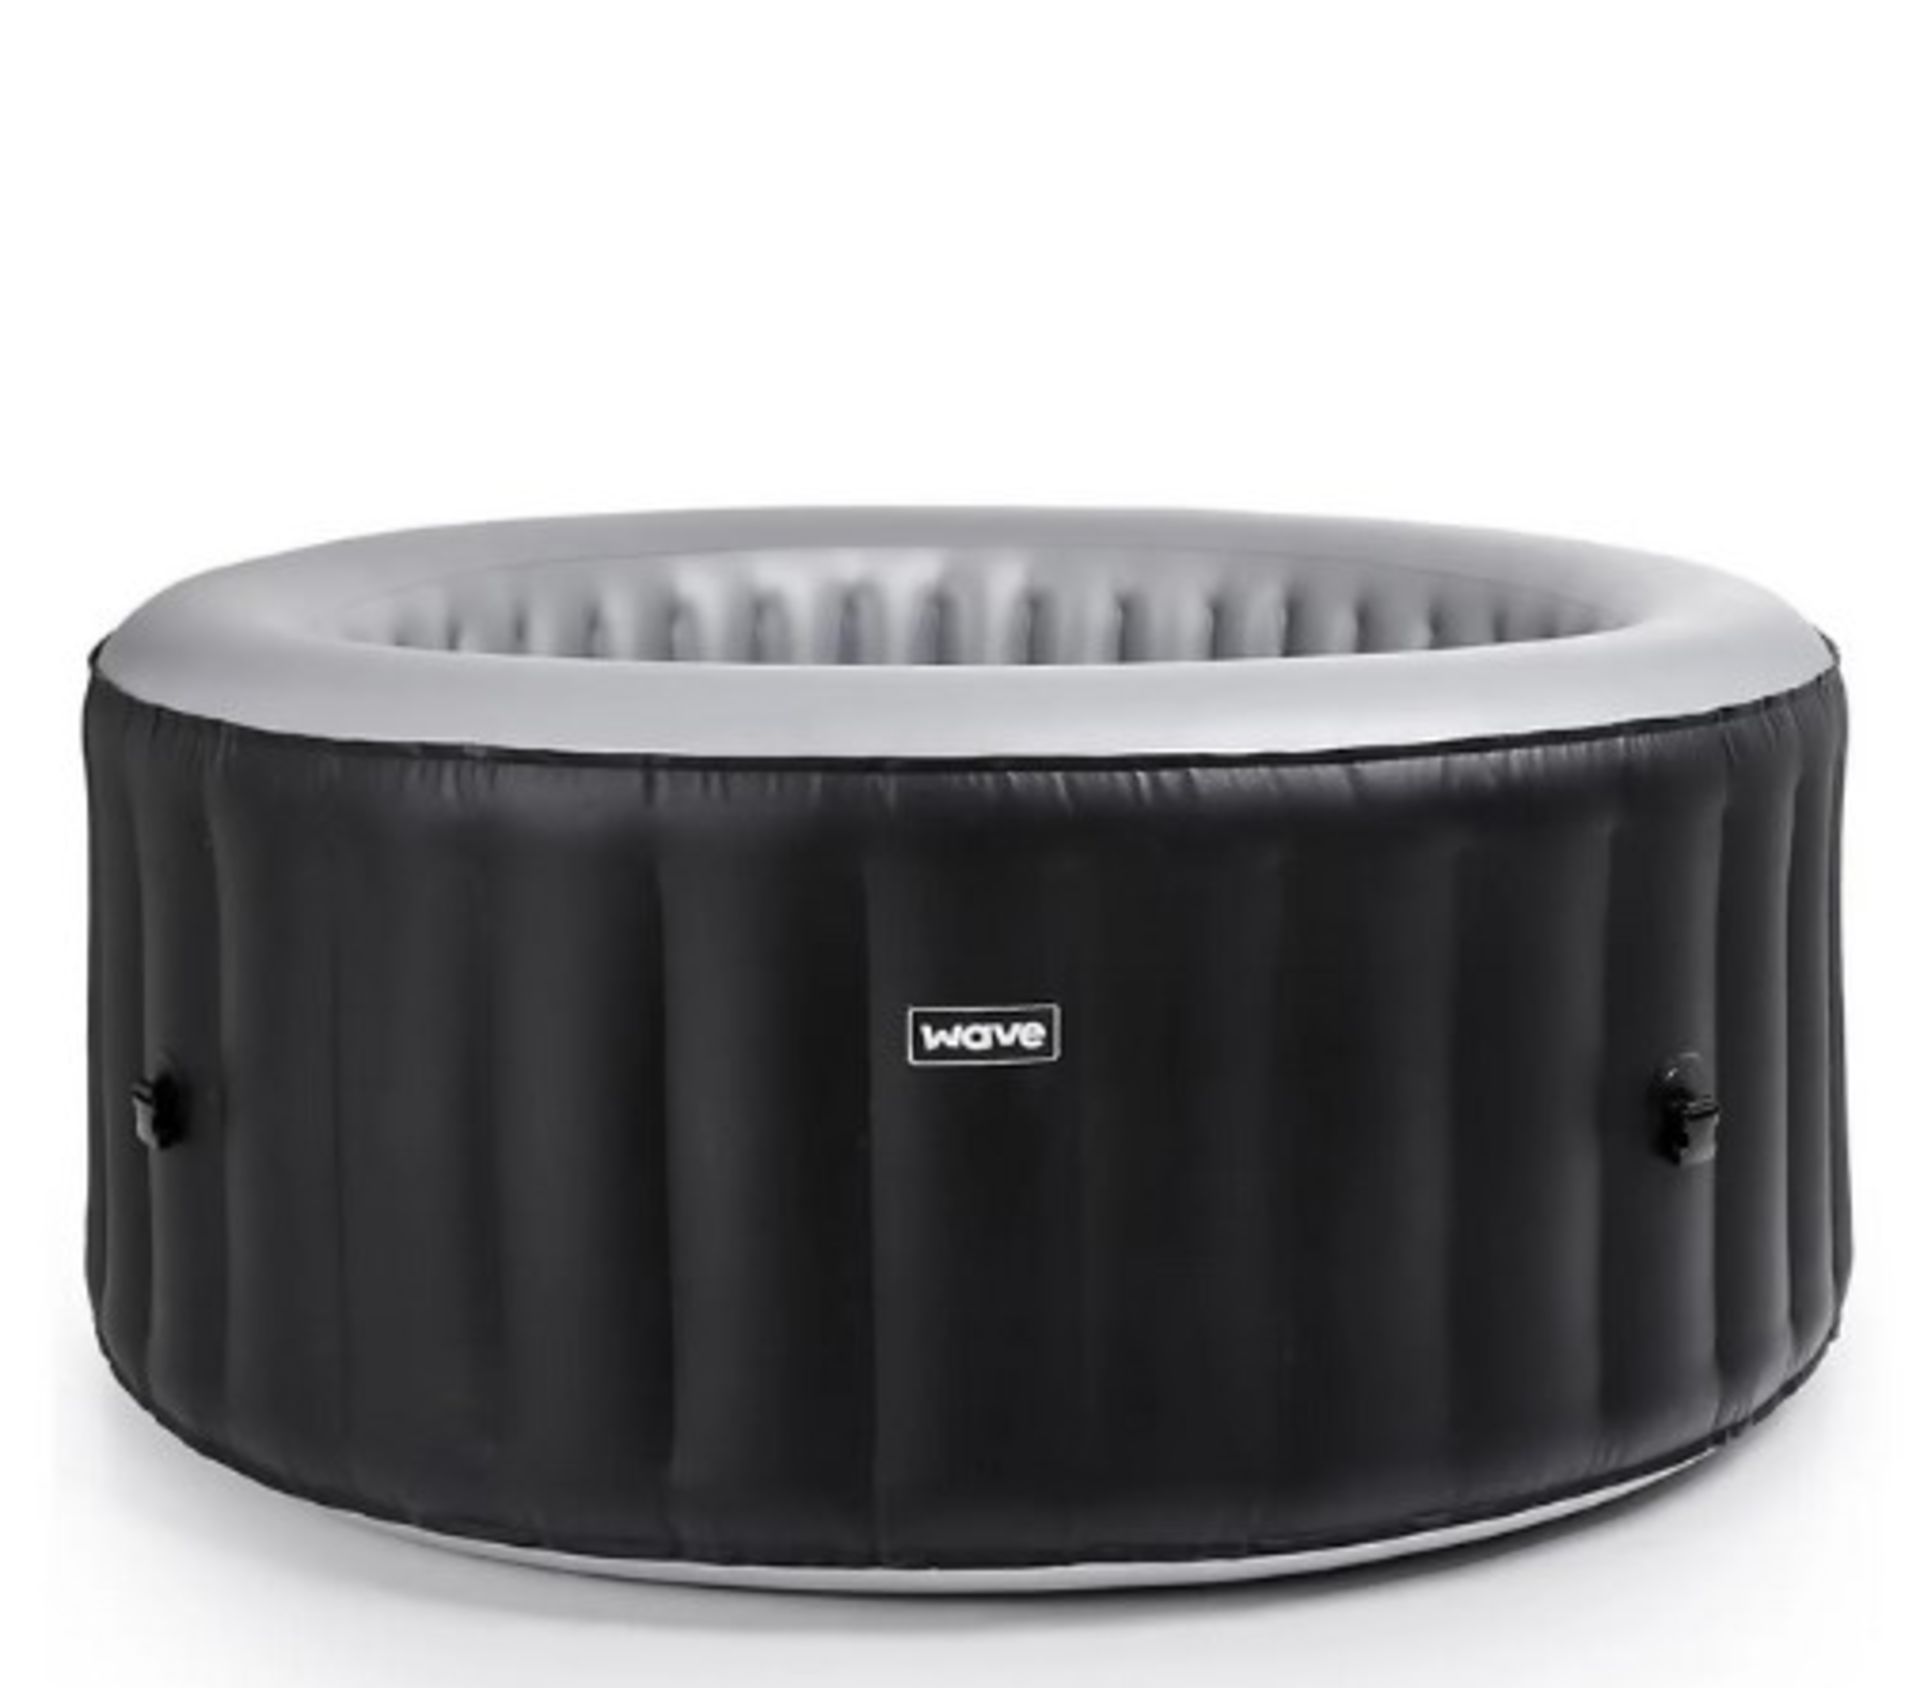 (9/Mez) RRP £455. Wave Atlantic 4 Person Hot Tub Solid Black With Pump. (Unchecked Direct Warehou... - Image 2 of 3